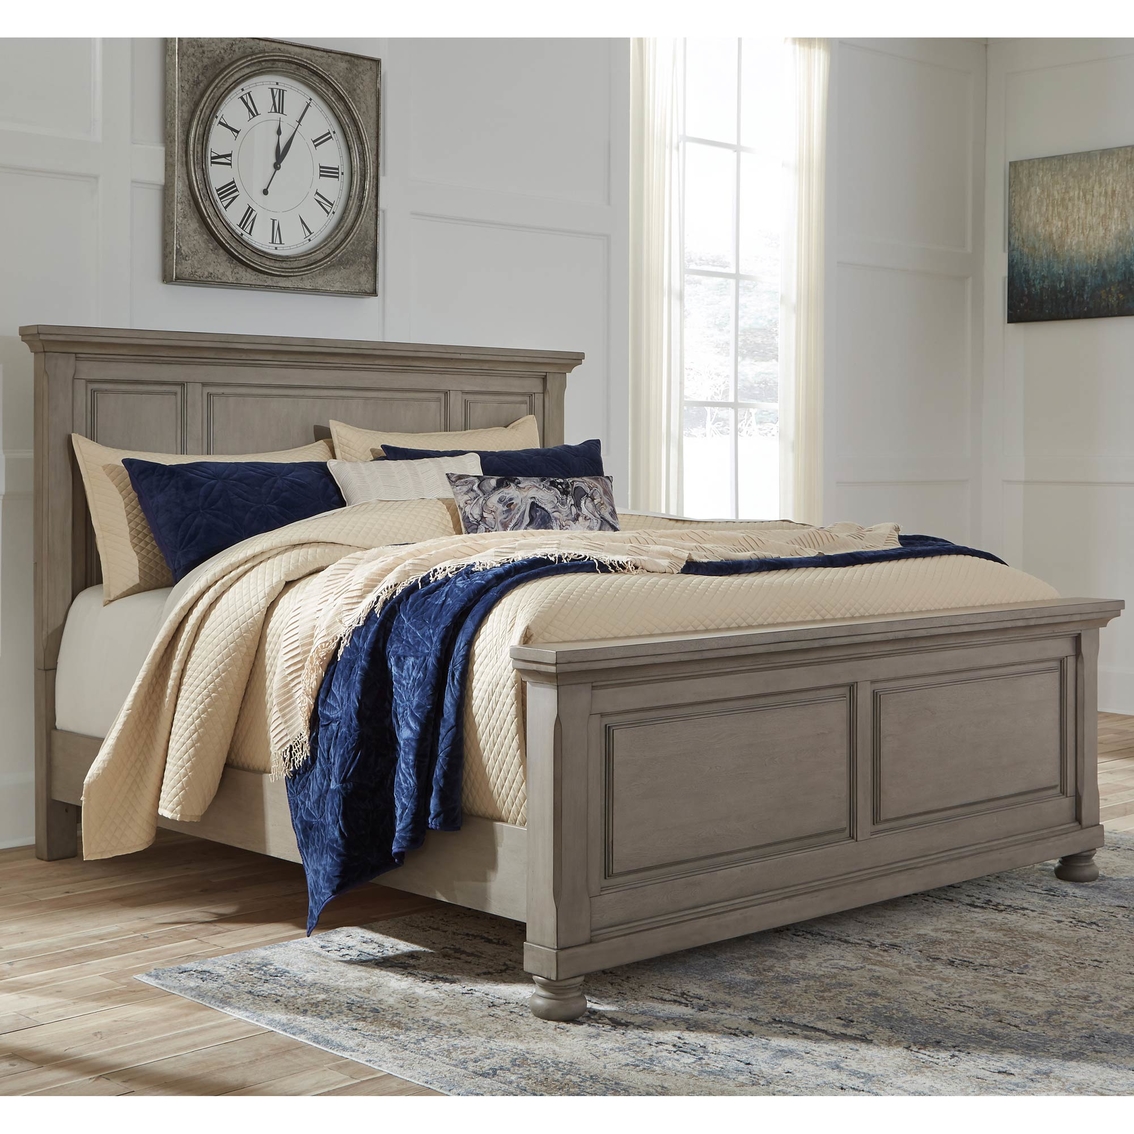 Signature Design by Ashley Lettner Panel Bed 5 pc. Set - Image 2 of 4